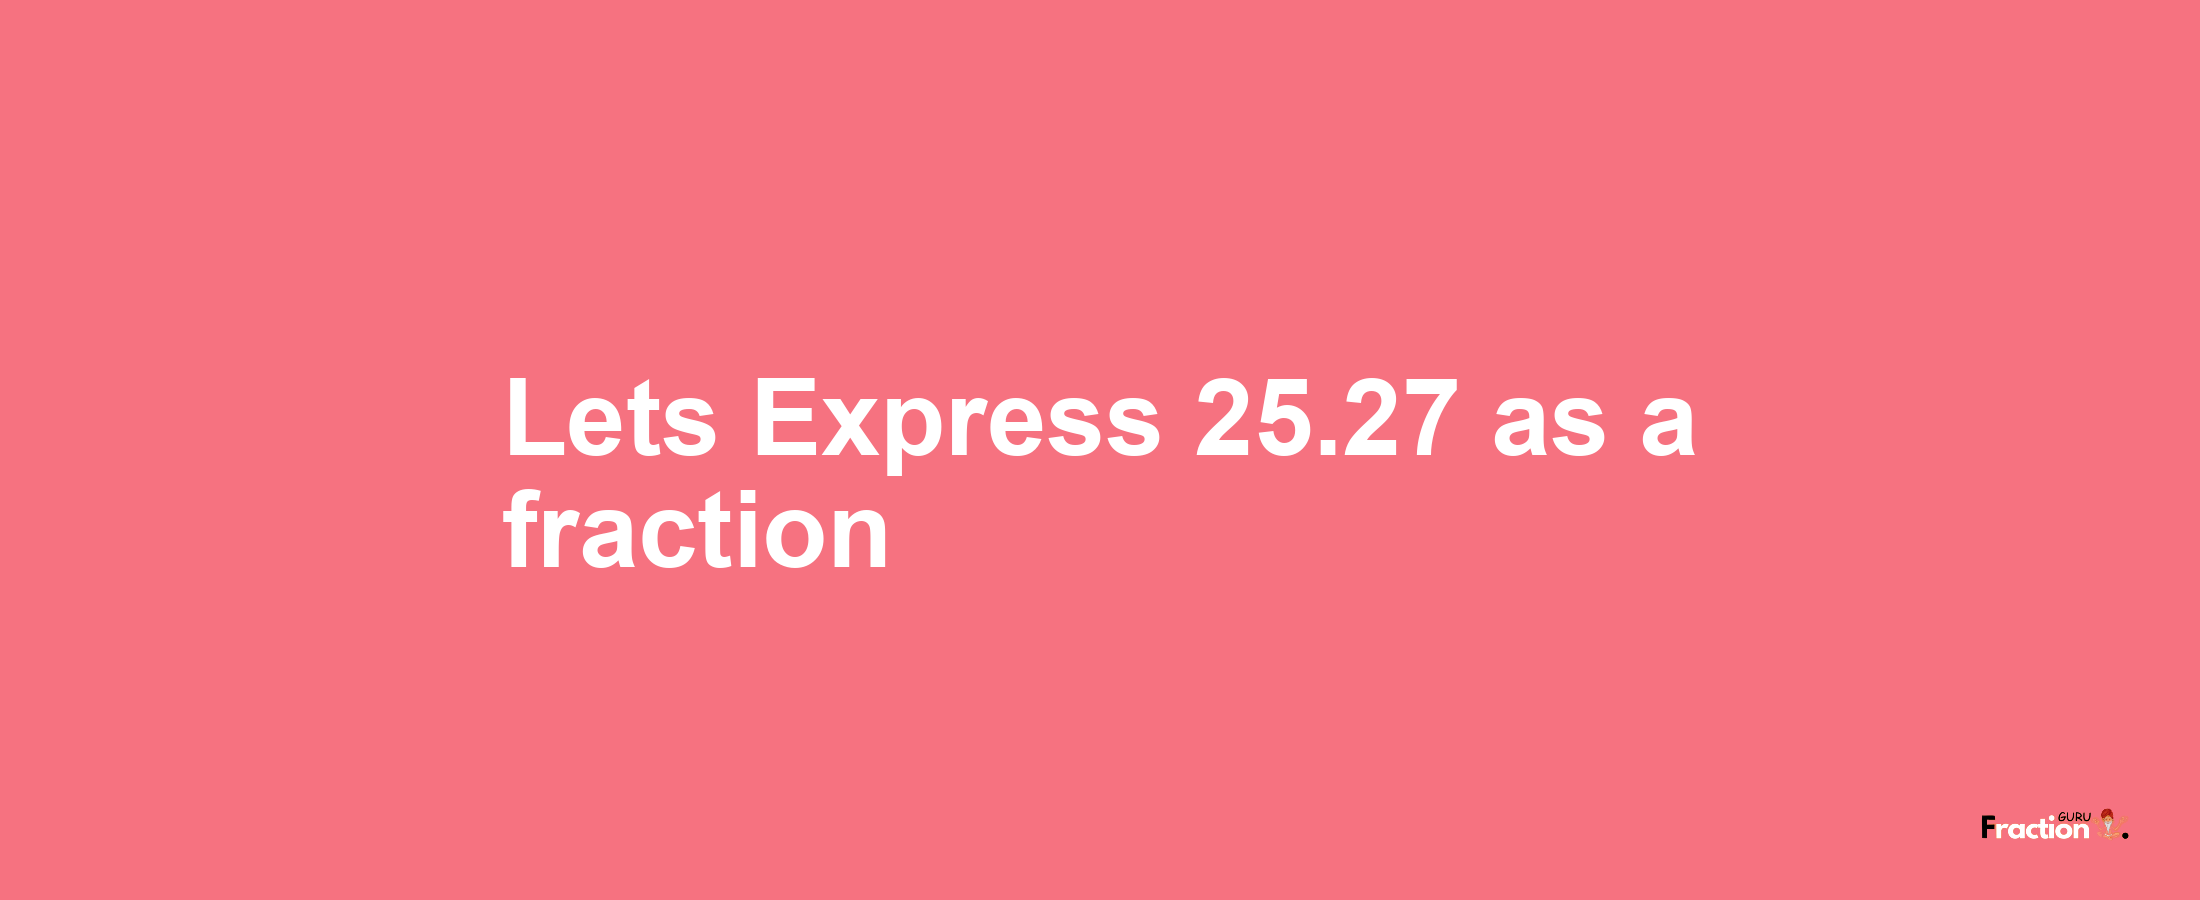 Lets Express 25.27 as afraction